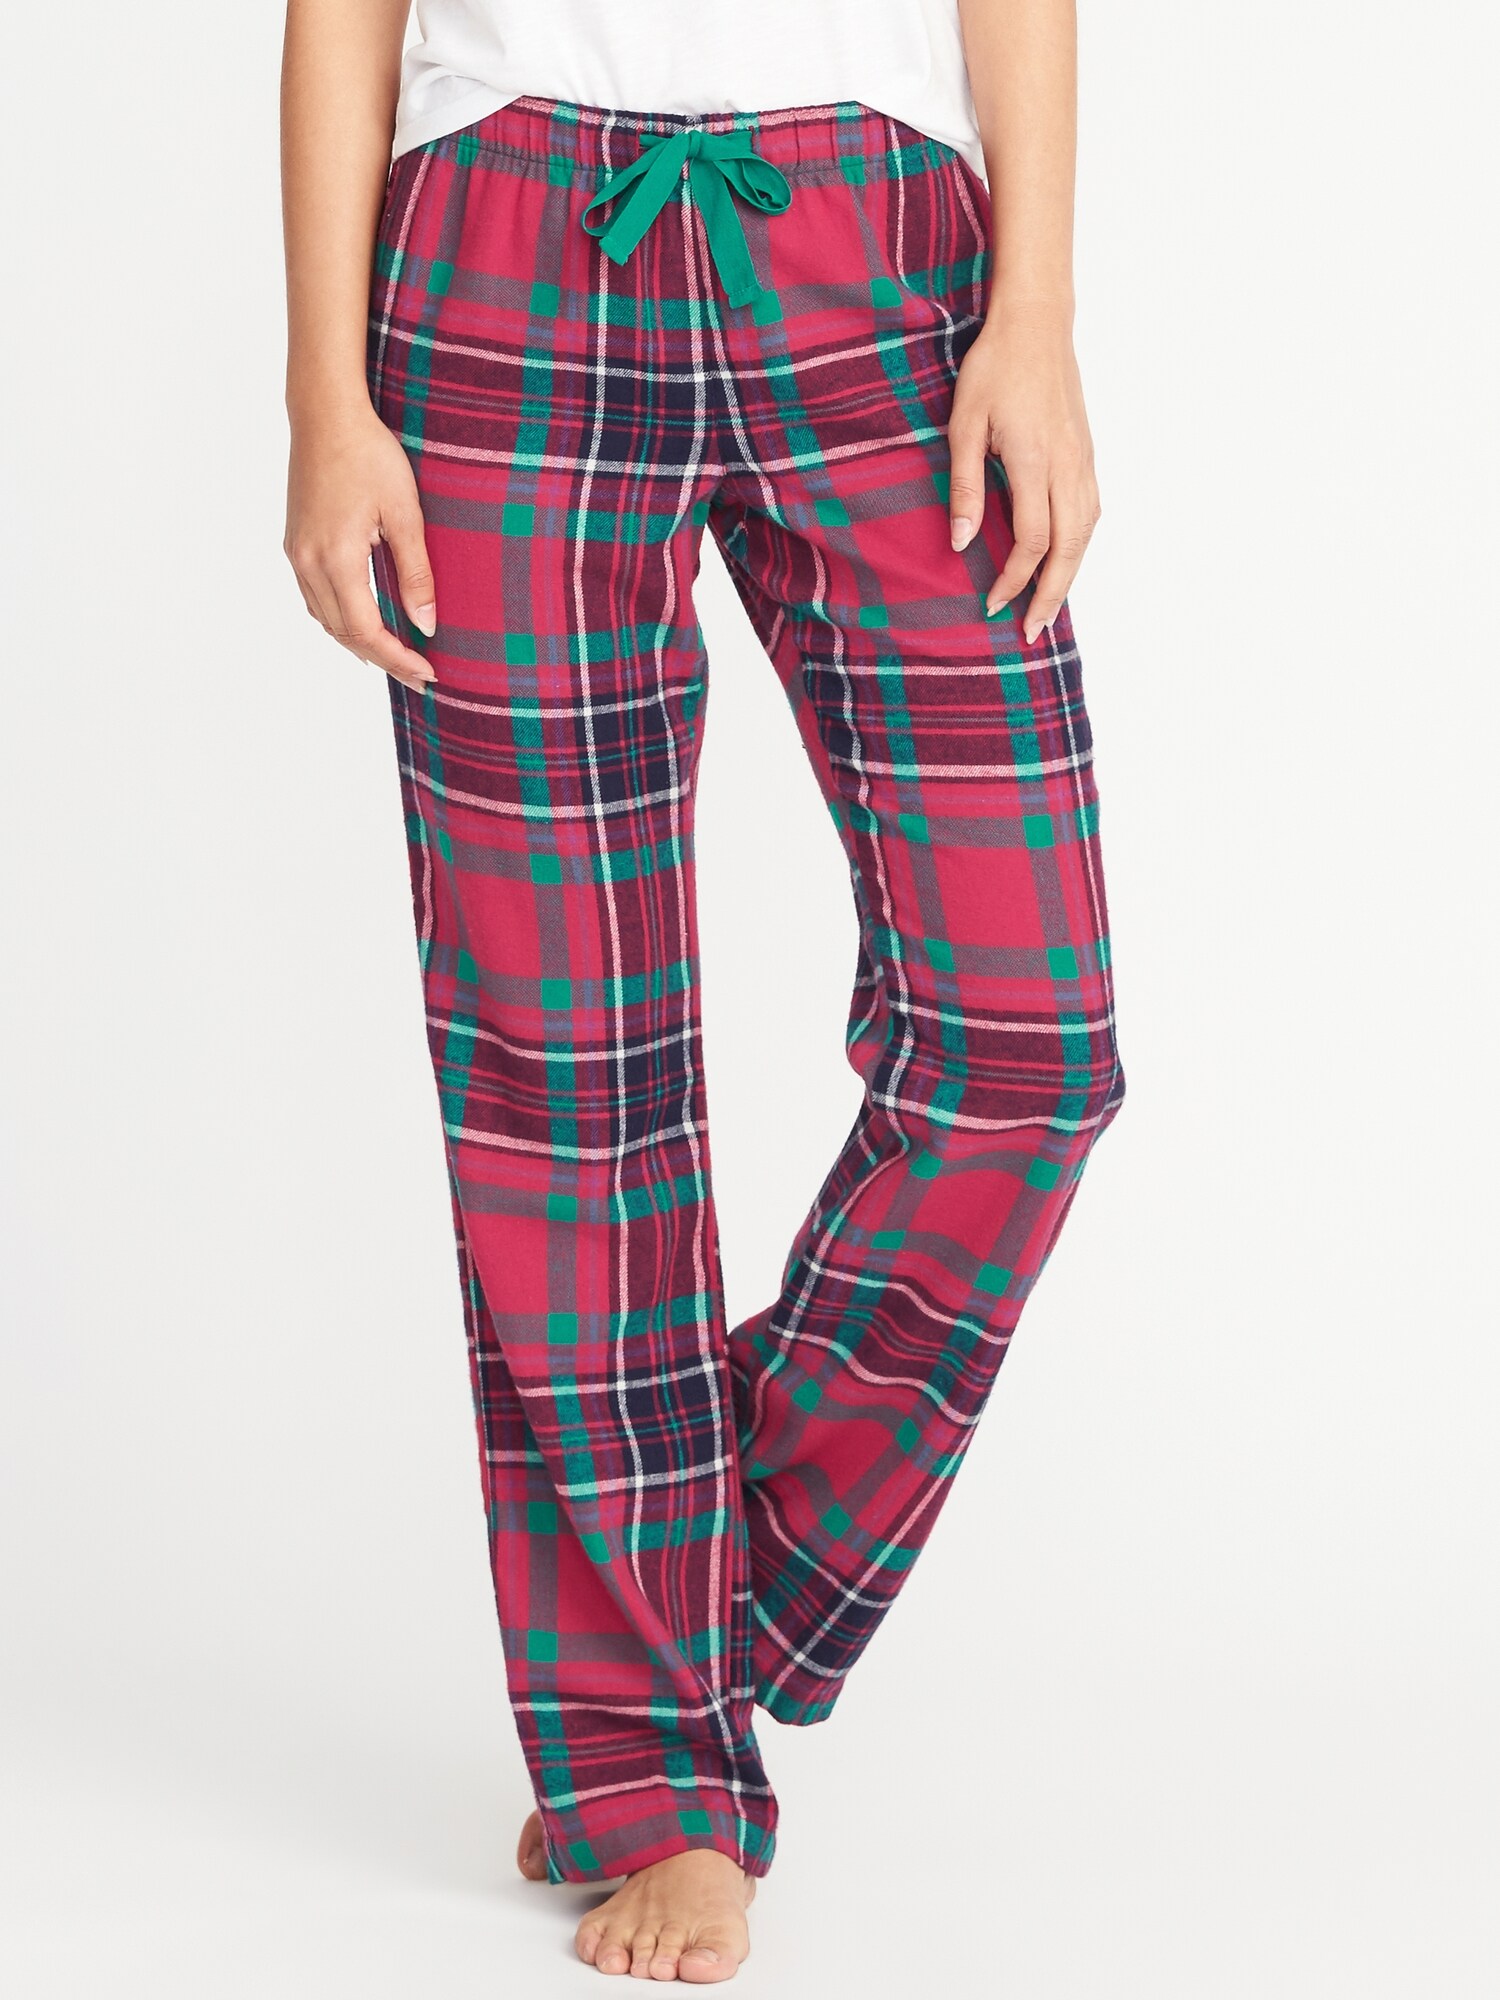 Patterned Flannel Sleep Pants for Women | Old Navy